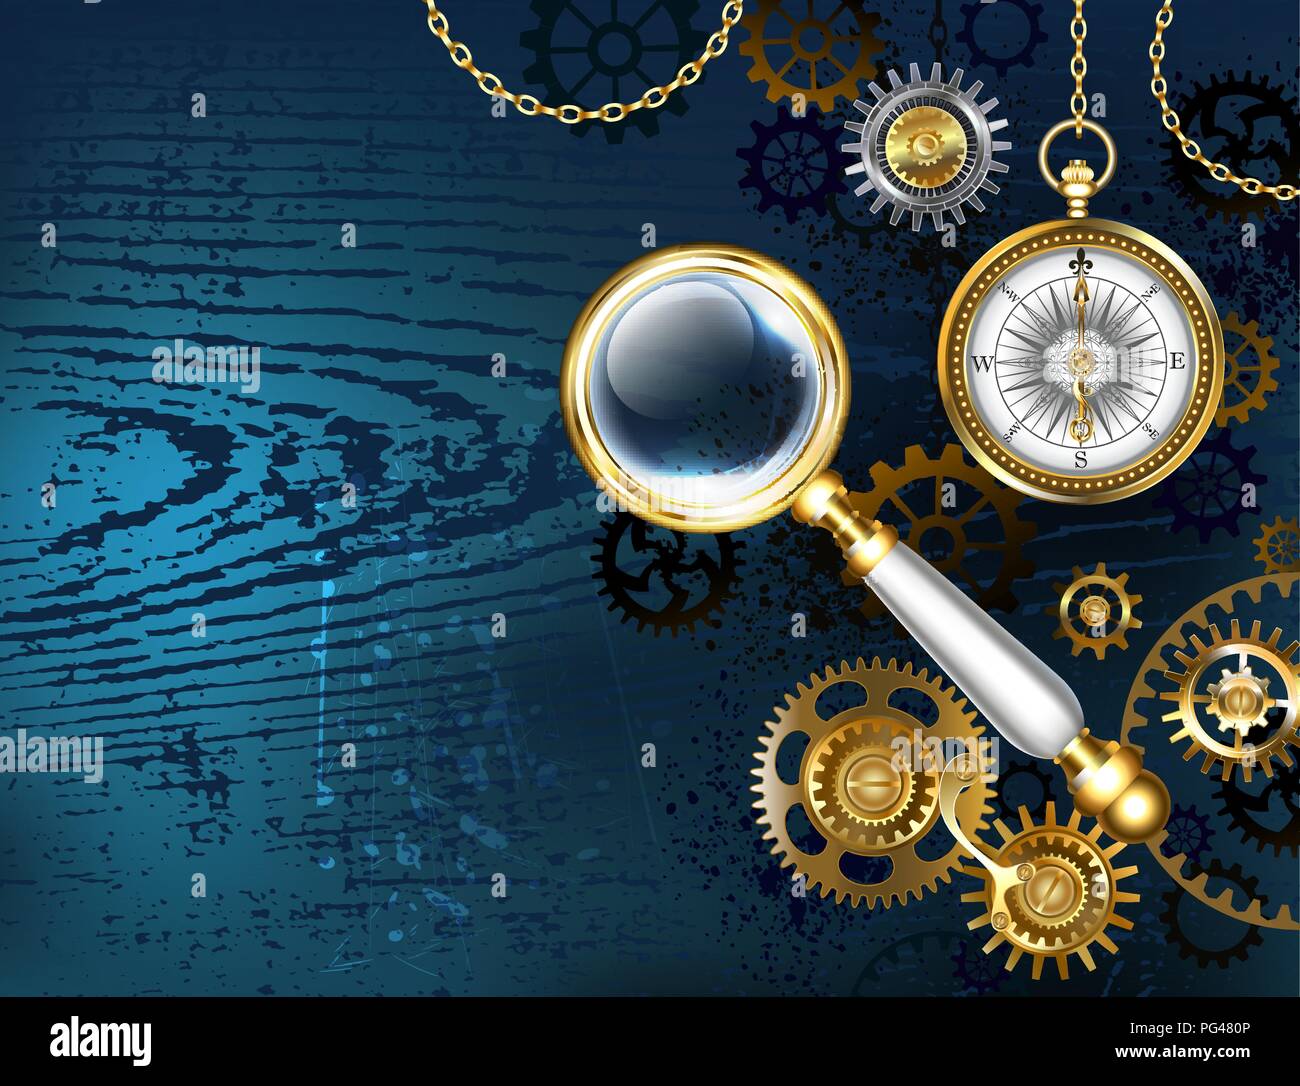 Blue wooden background with jeweler magnifier, antique compass and gold and brass gears. Steampunk style. Stock Vector